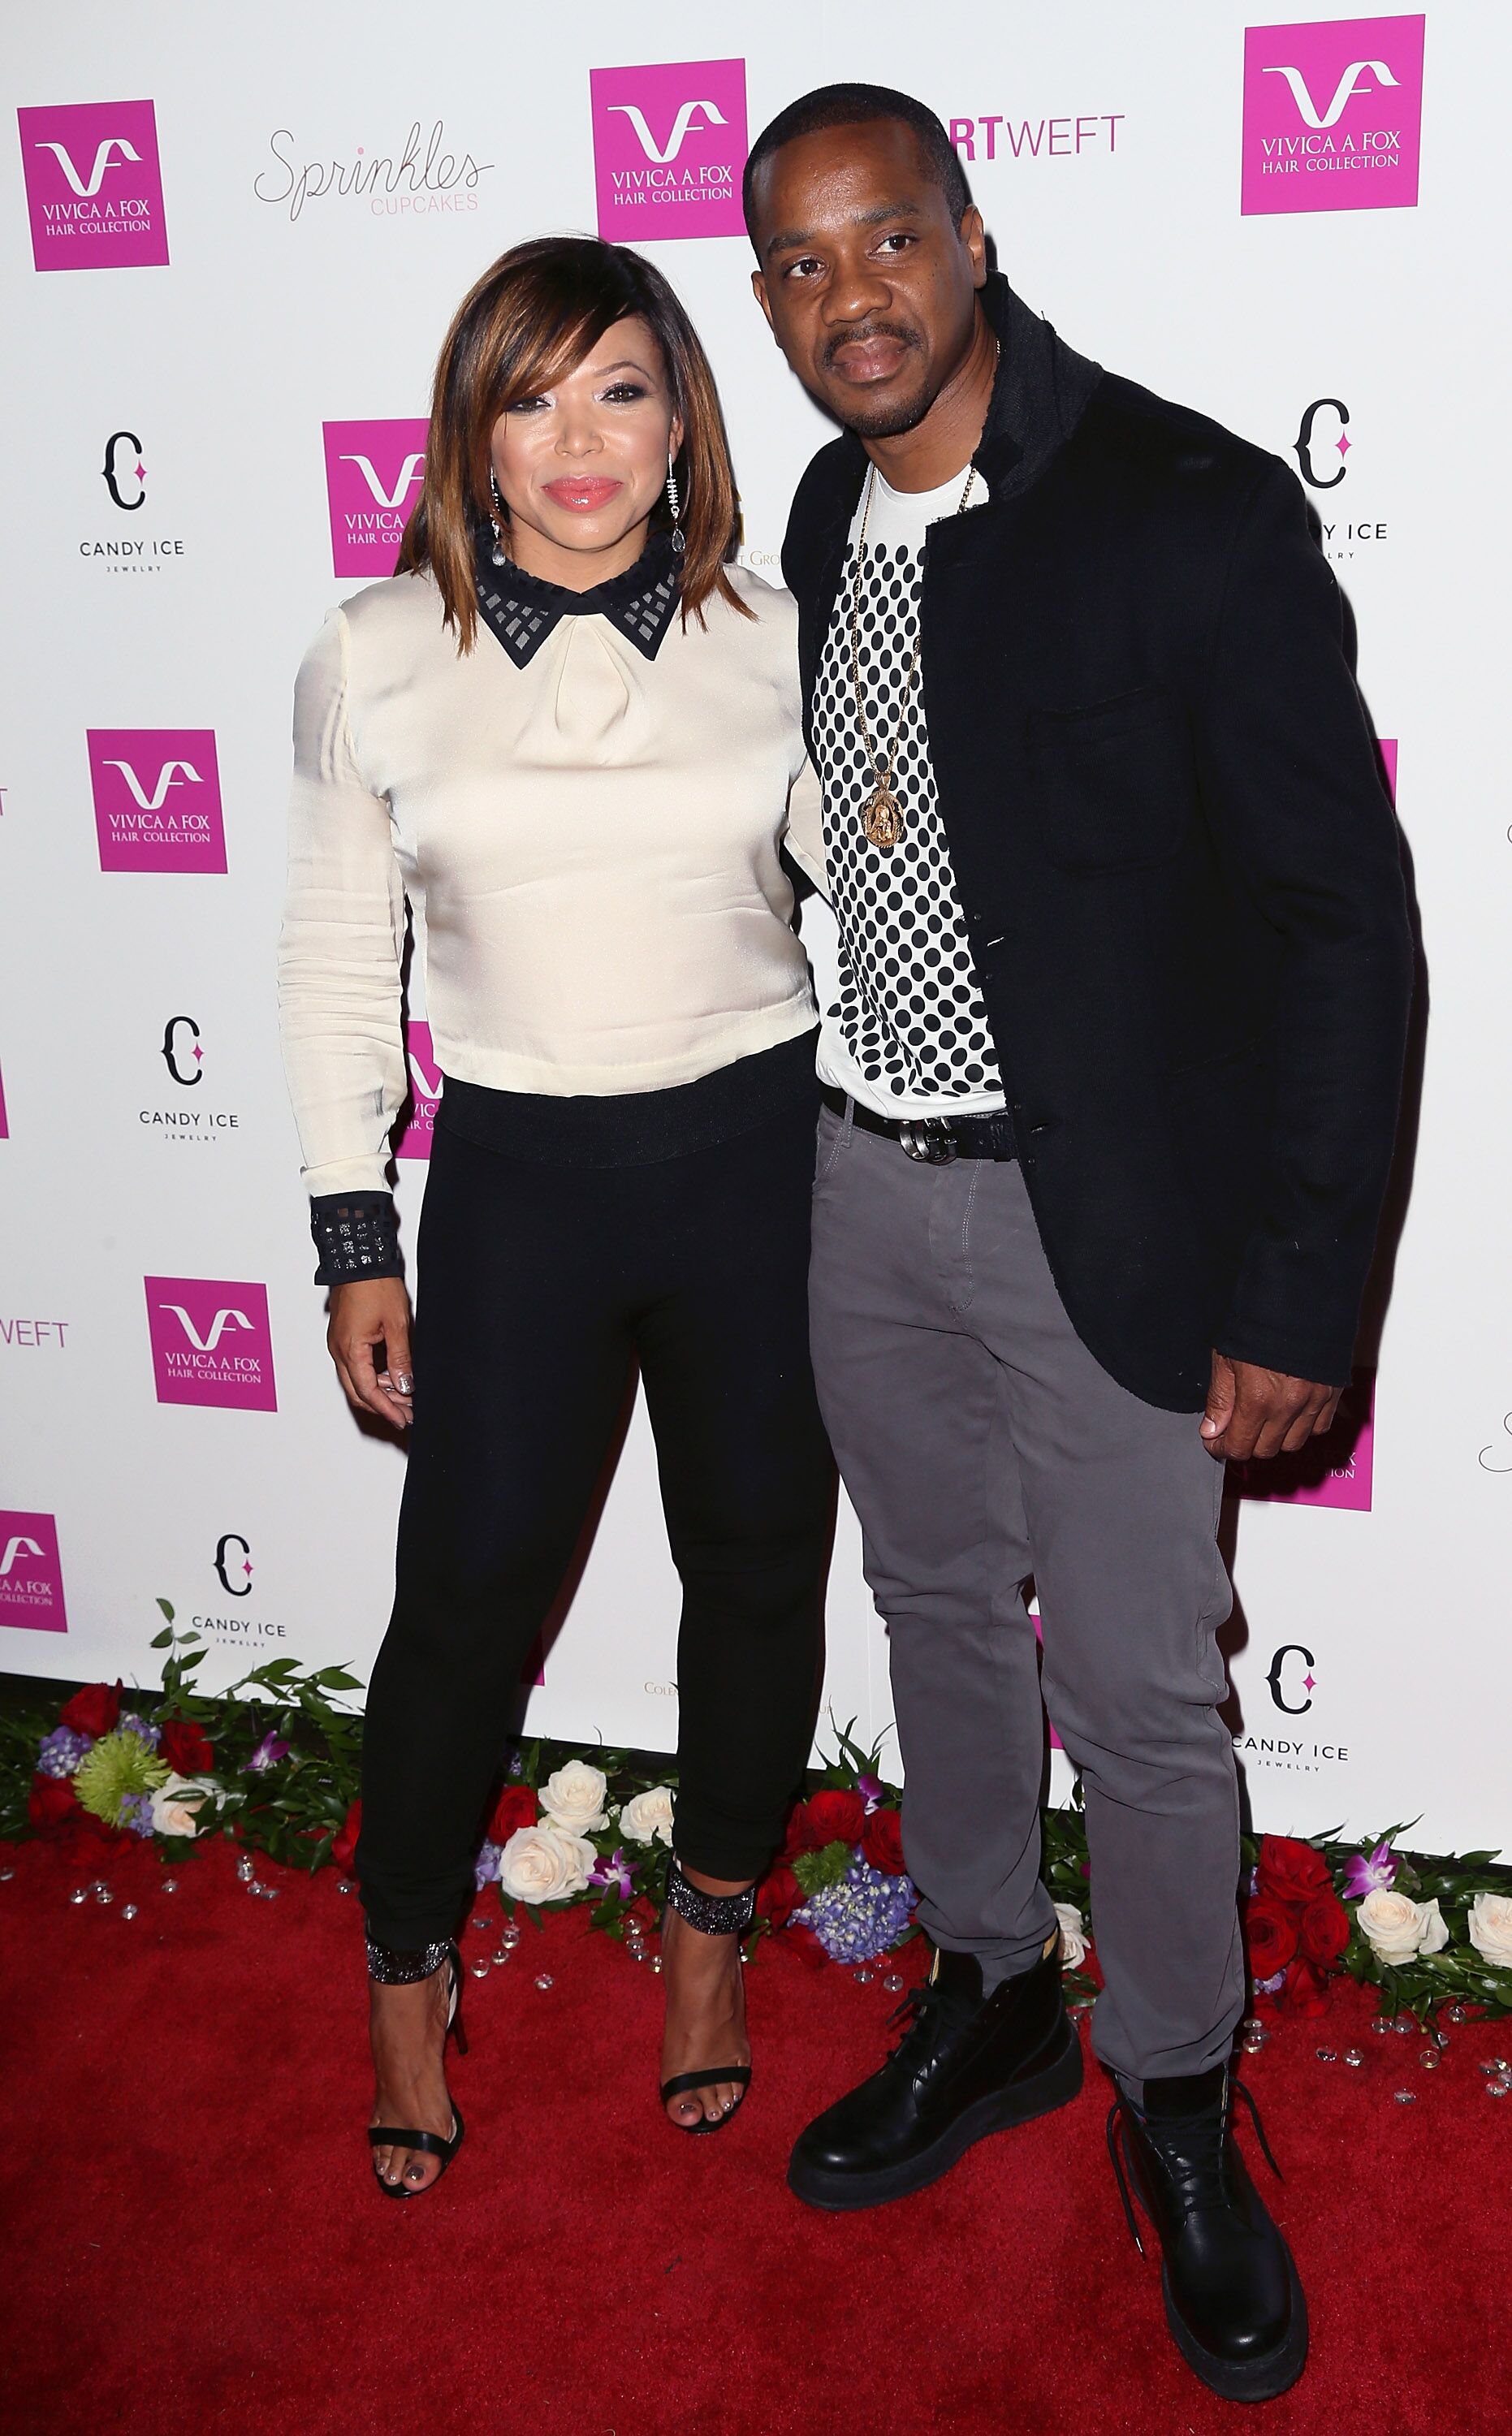 Tisha Campbell and Duane Martin at Vivica A. Fox's 50th Birthday Event | Source: Getty Images/GlobalImagesUkraine